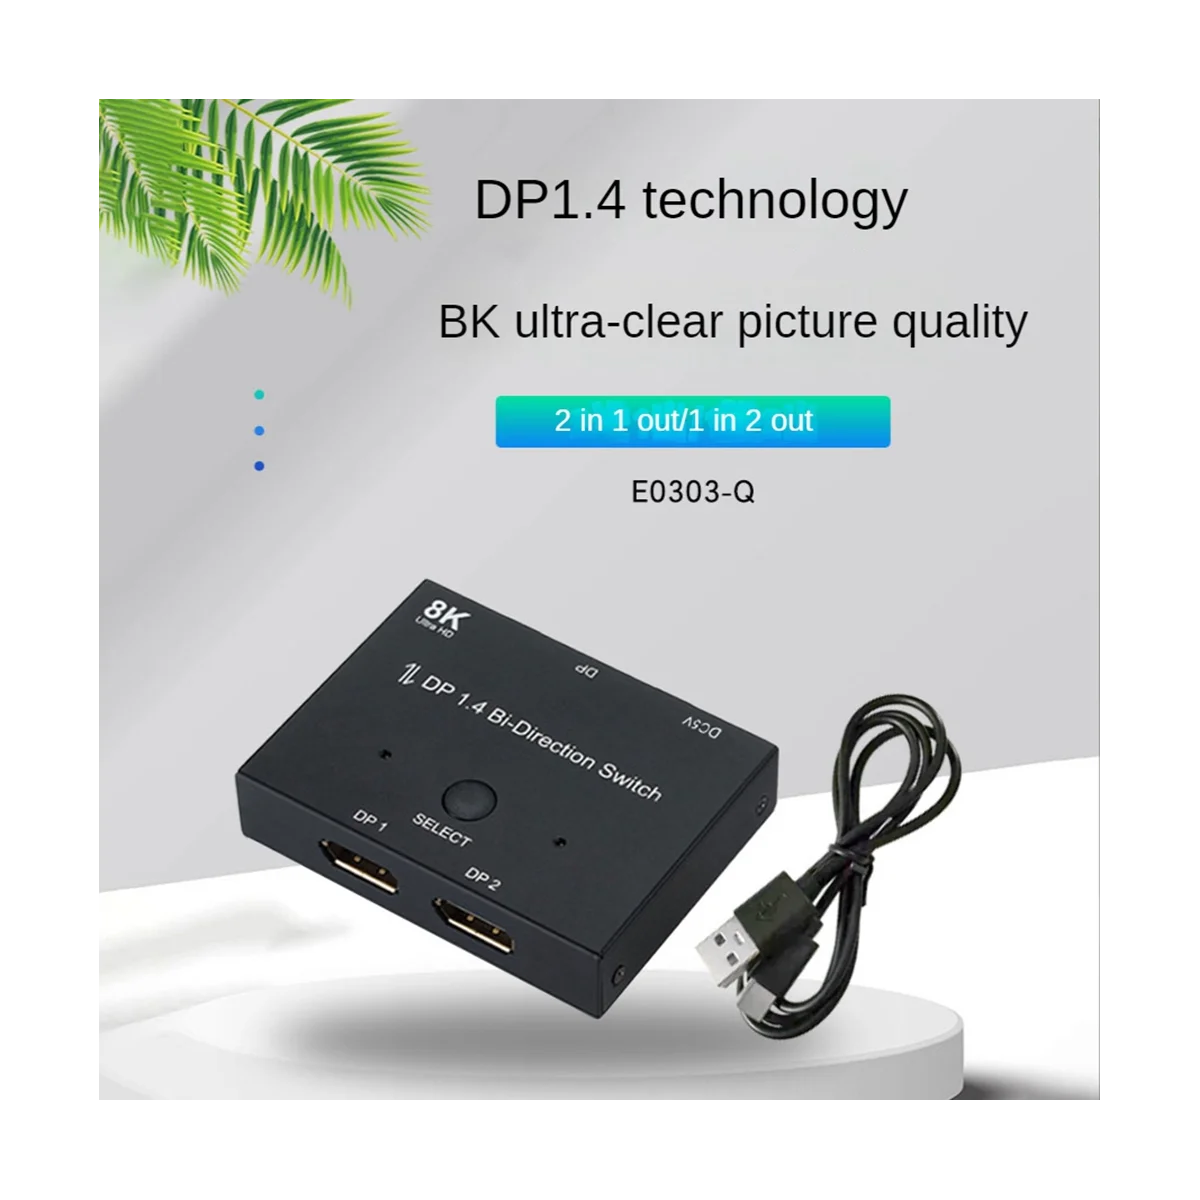 

DisplayPort Switch Ultra HD 8K Bi-Directional DP 1.4 Switcher Splitter 2 in 1 Out 1 in 2 Out Supports 4K@120Hz 8K@60Hz